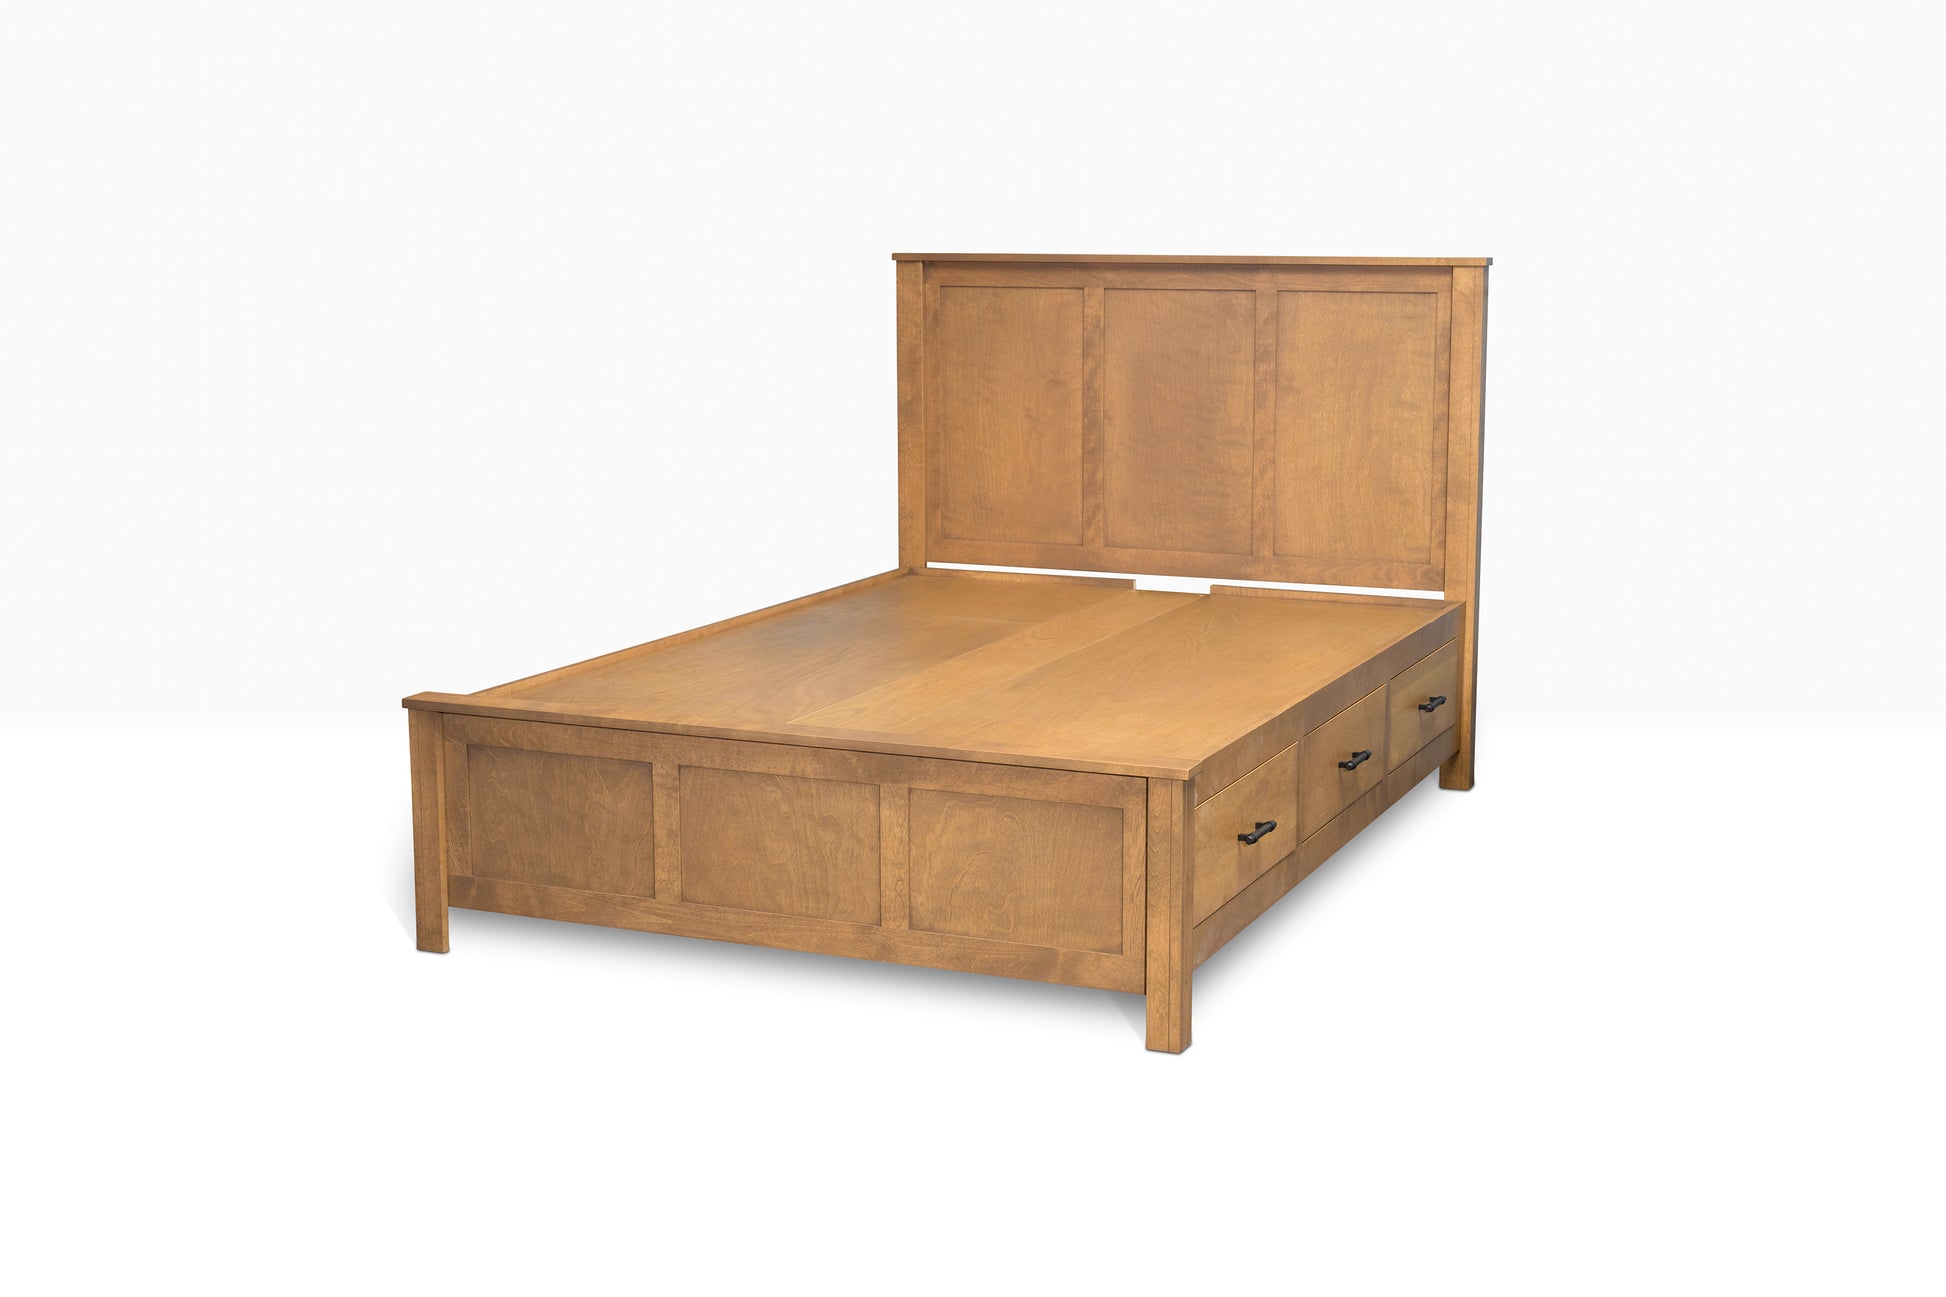 Acadia Tremont Storage Bed with Three Drawers in Early American finish, from the side, showing three storage drawers.